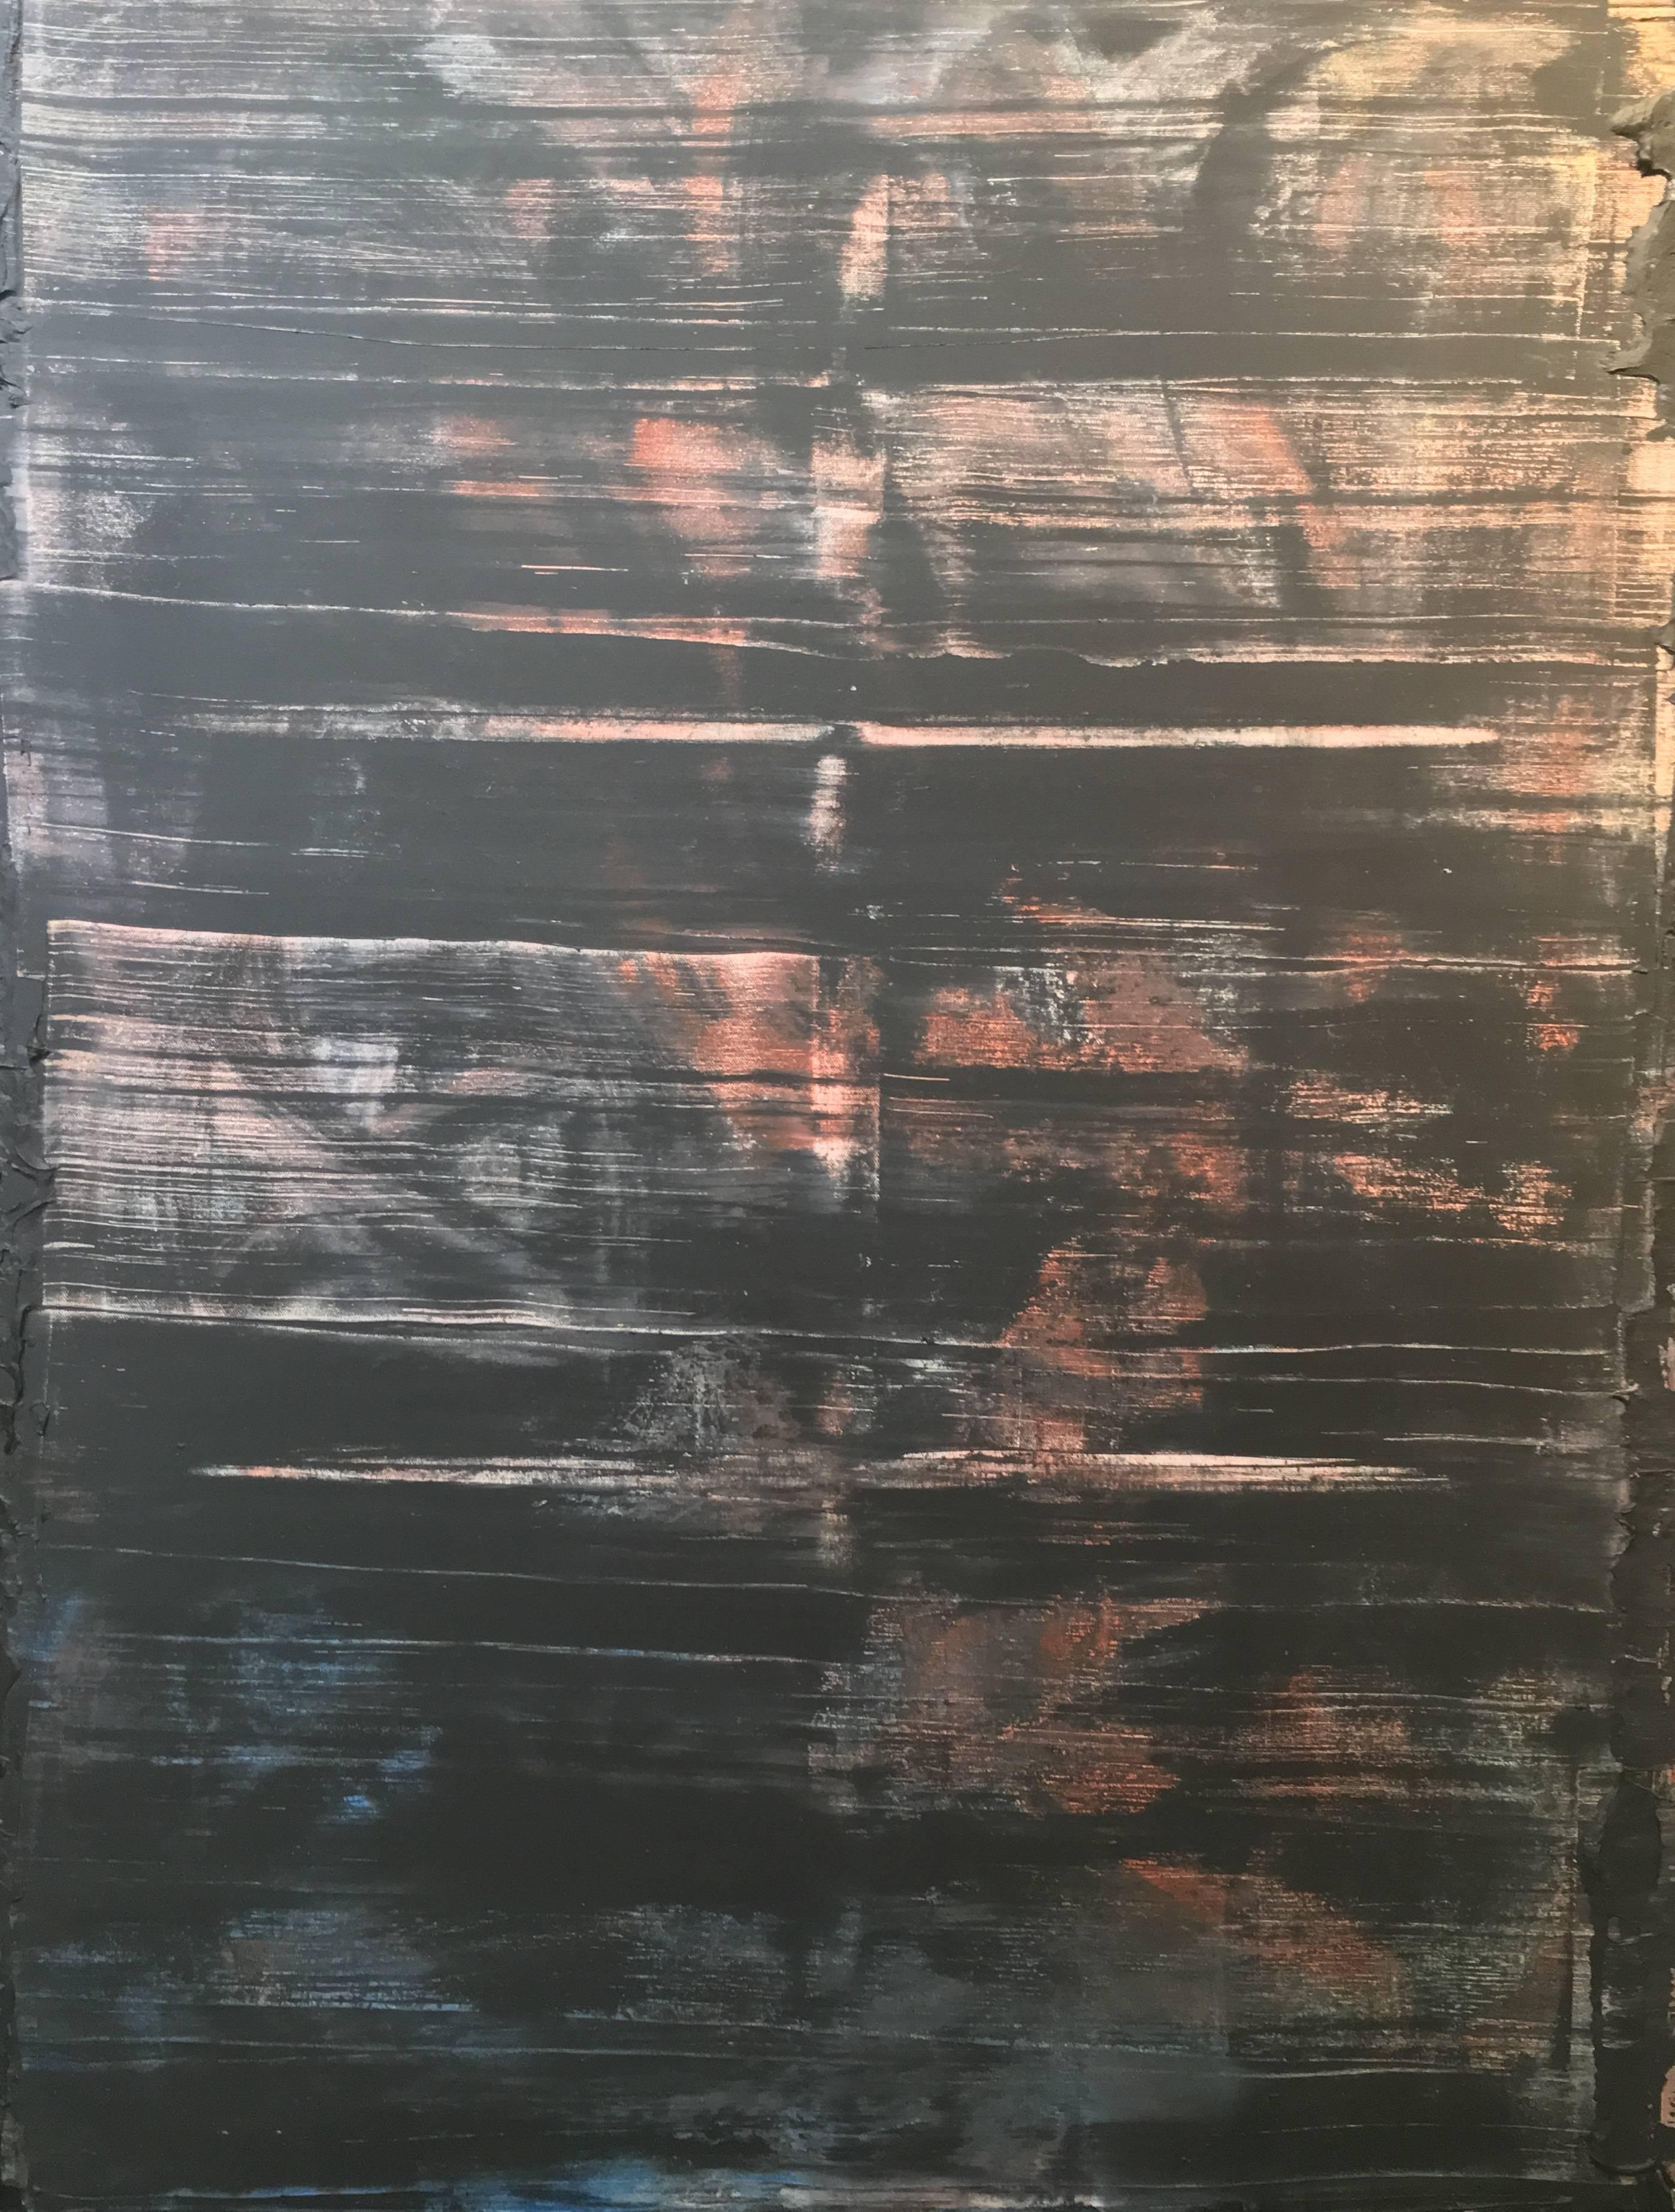 Contemporary abstract painting by artist, Shane Townley. Acrylic and textured medium painting on canvas. Great mid century modern style. Canvas comes fully stretched on 1 1/2in thick canvas, unframed and painted edges. Perfect piece for any